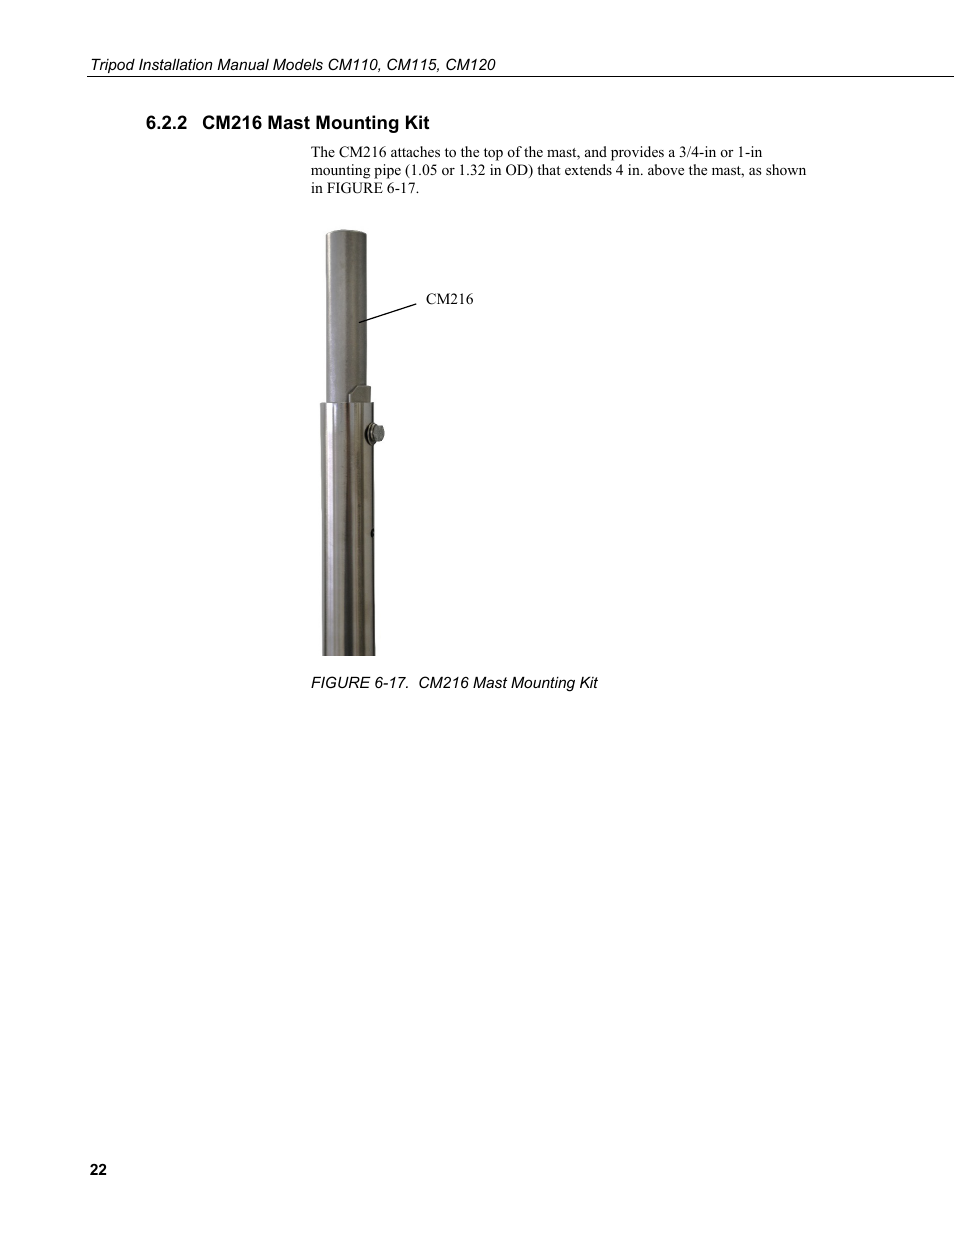 2 cm216 mast mounting kit, Cm216 mast mounting kit, 17. cm216 mast mounting kit | Campbell Scientific CM110, CM115, CM120 Tripod Installation User Manual | Page 30 / 40